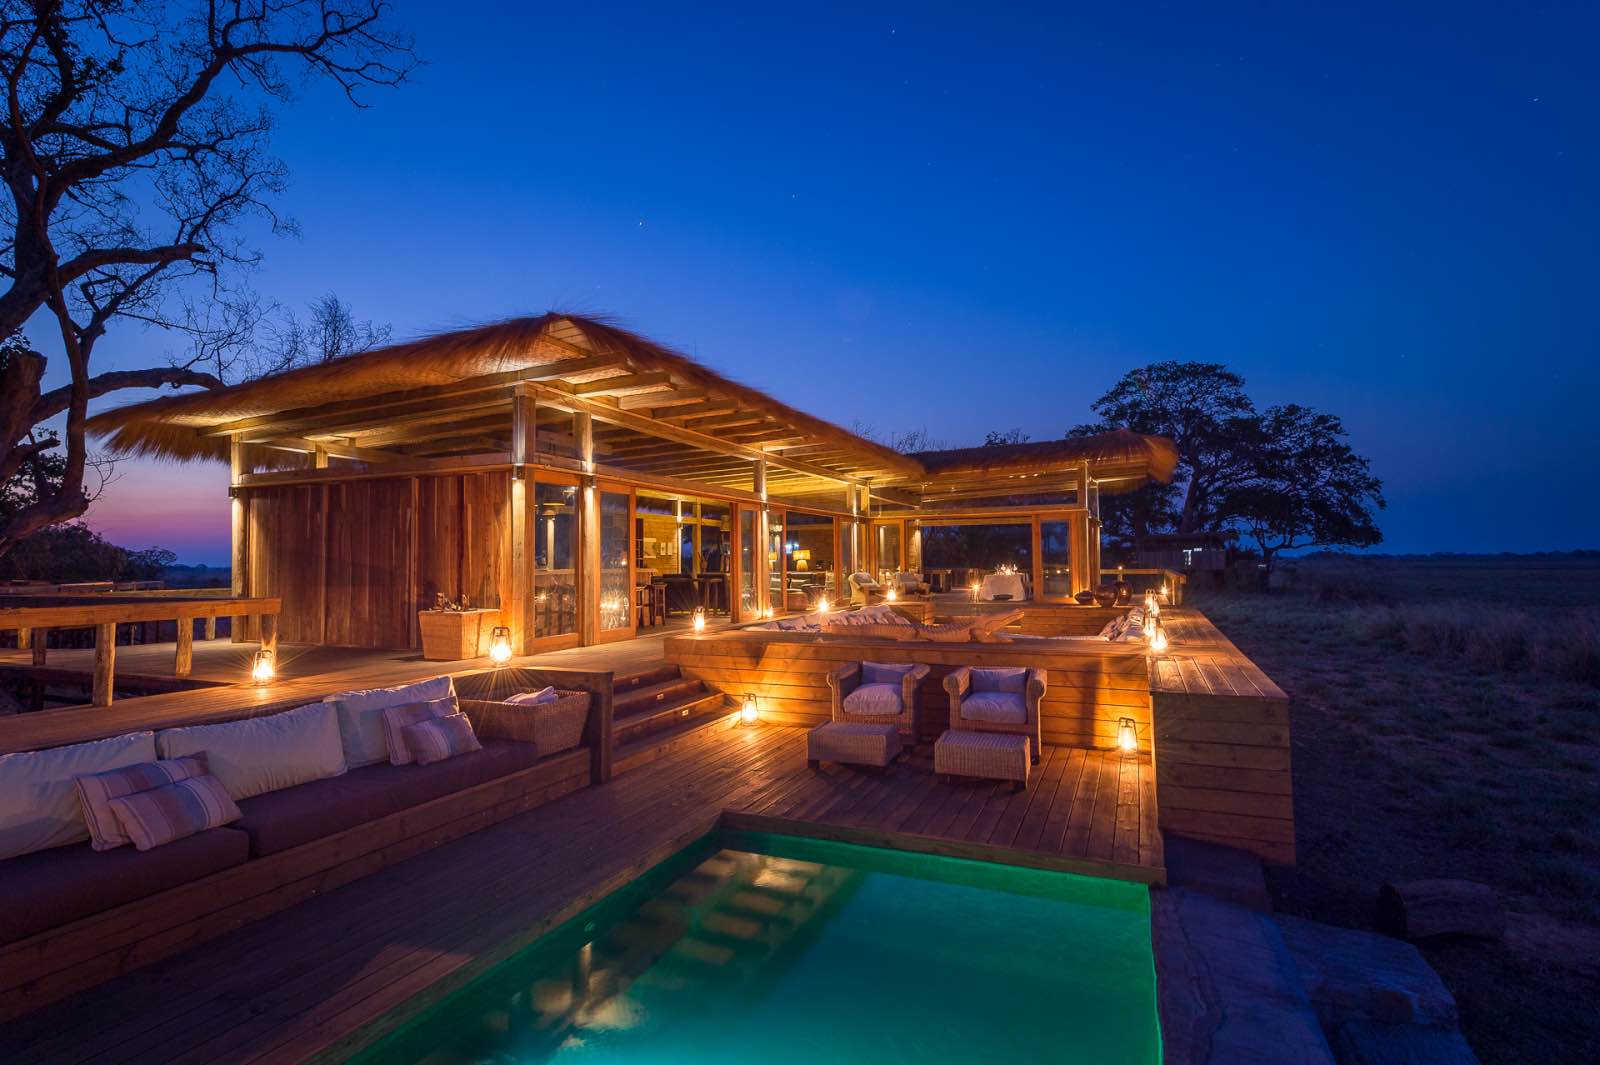 Gently glowing in the evening light, the luxury suites at Shumba Camp are a work of art